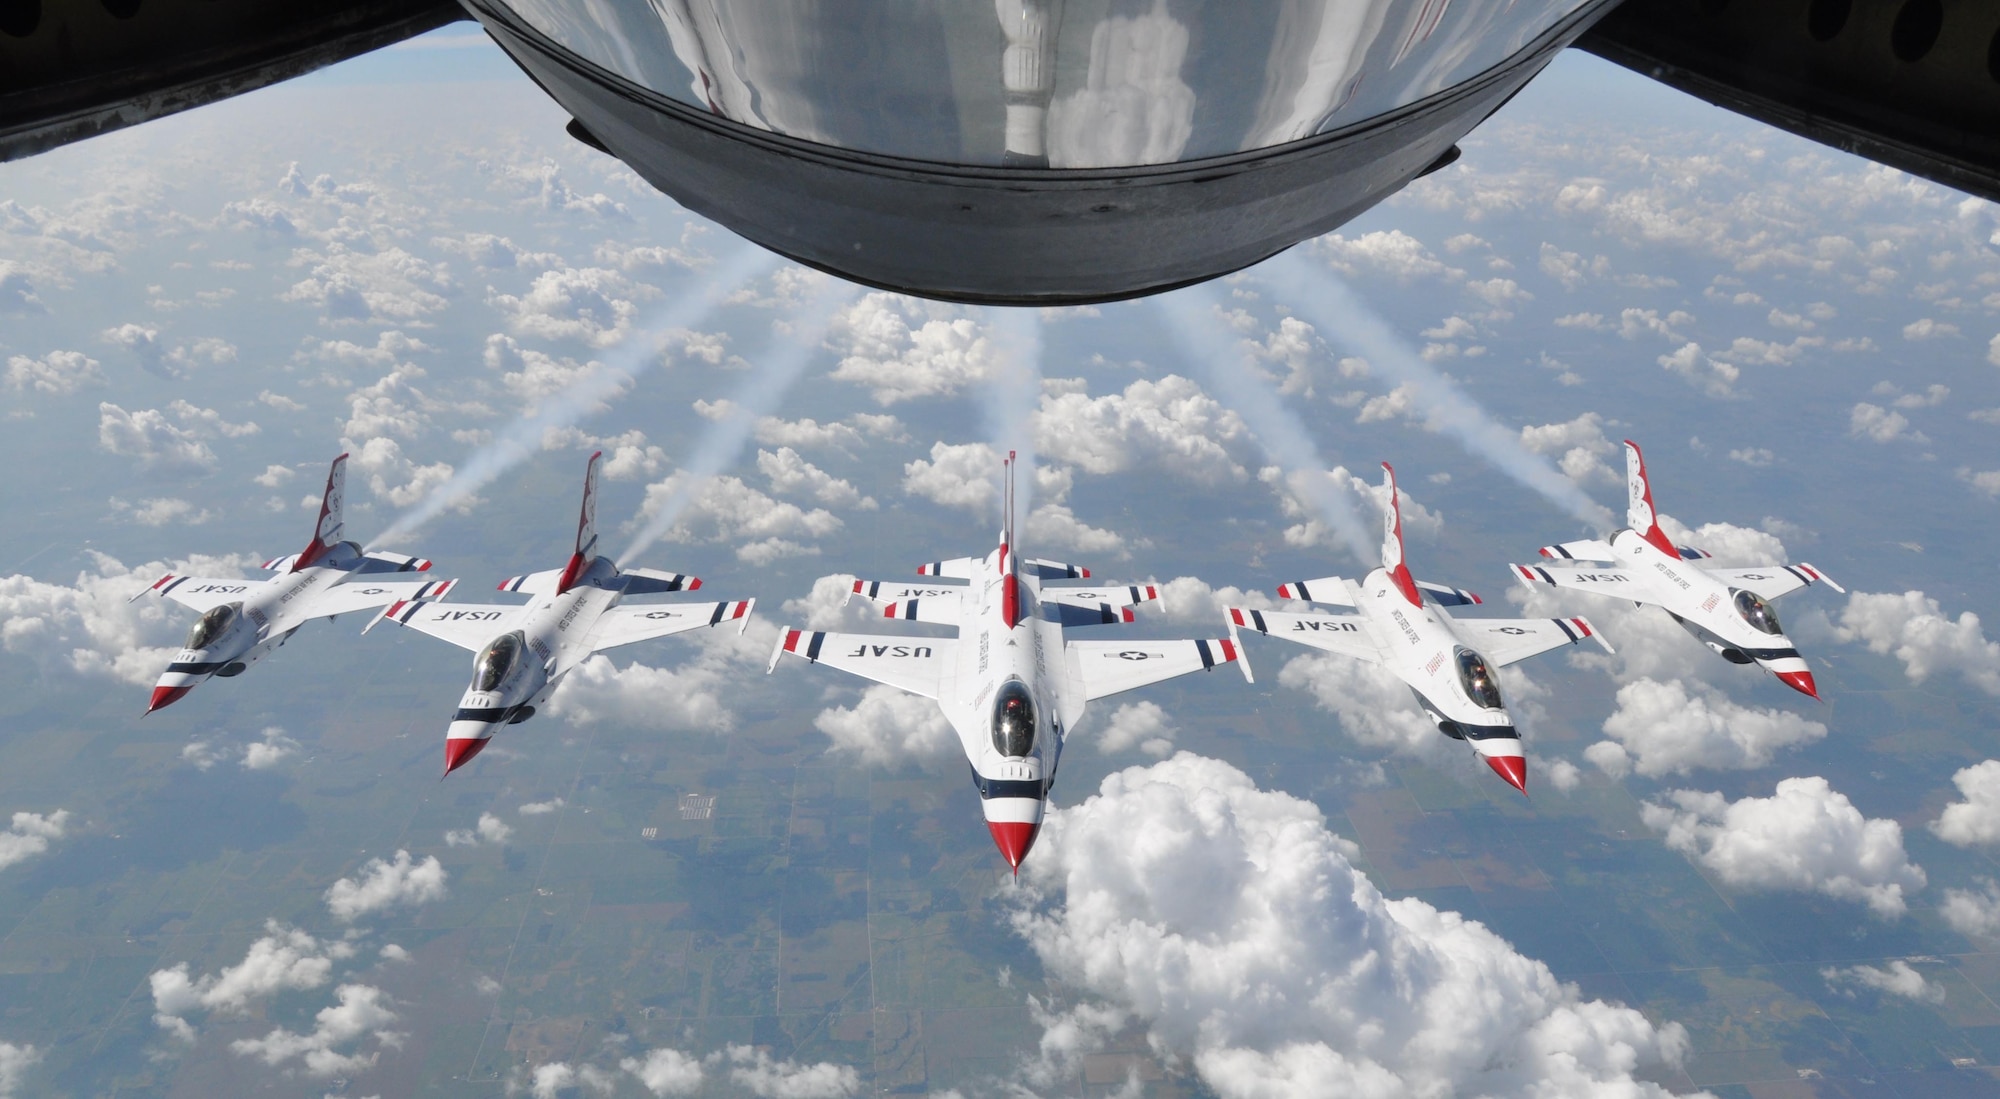 The U. S. Air Force Thunderbirds Air Demonstration Squadron, fly their F-16 Fighting Falcons in formation near the refueling boom of a KC-135 Stratotanker from McConnell Air Force Base, Kan., Sept. 3, 2015.  The KC-135 provided cross-country air refueling support for the Thunderbirds.  The squadron was on their way to the Cleveland National Air Show in Cleveland, Ohio, Sept. 5-7.  The squadron performs 75 demonstrations each year and has never canceled a demonstration due to a maintenance difficulty.  (U.S. Air Force photo by Tech. Sgt. Abigail Klein)